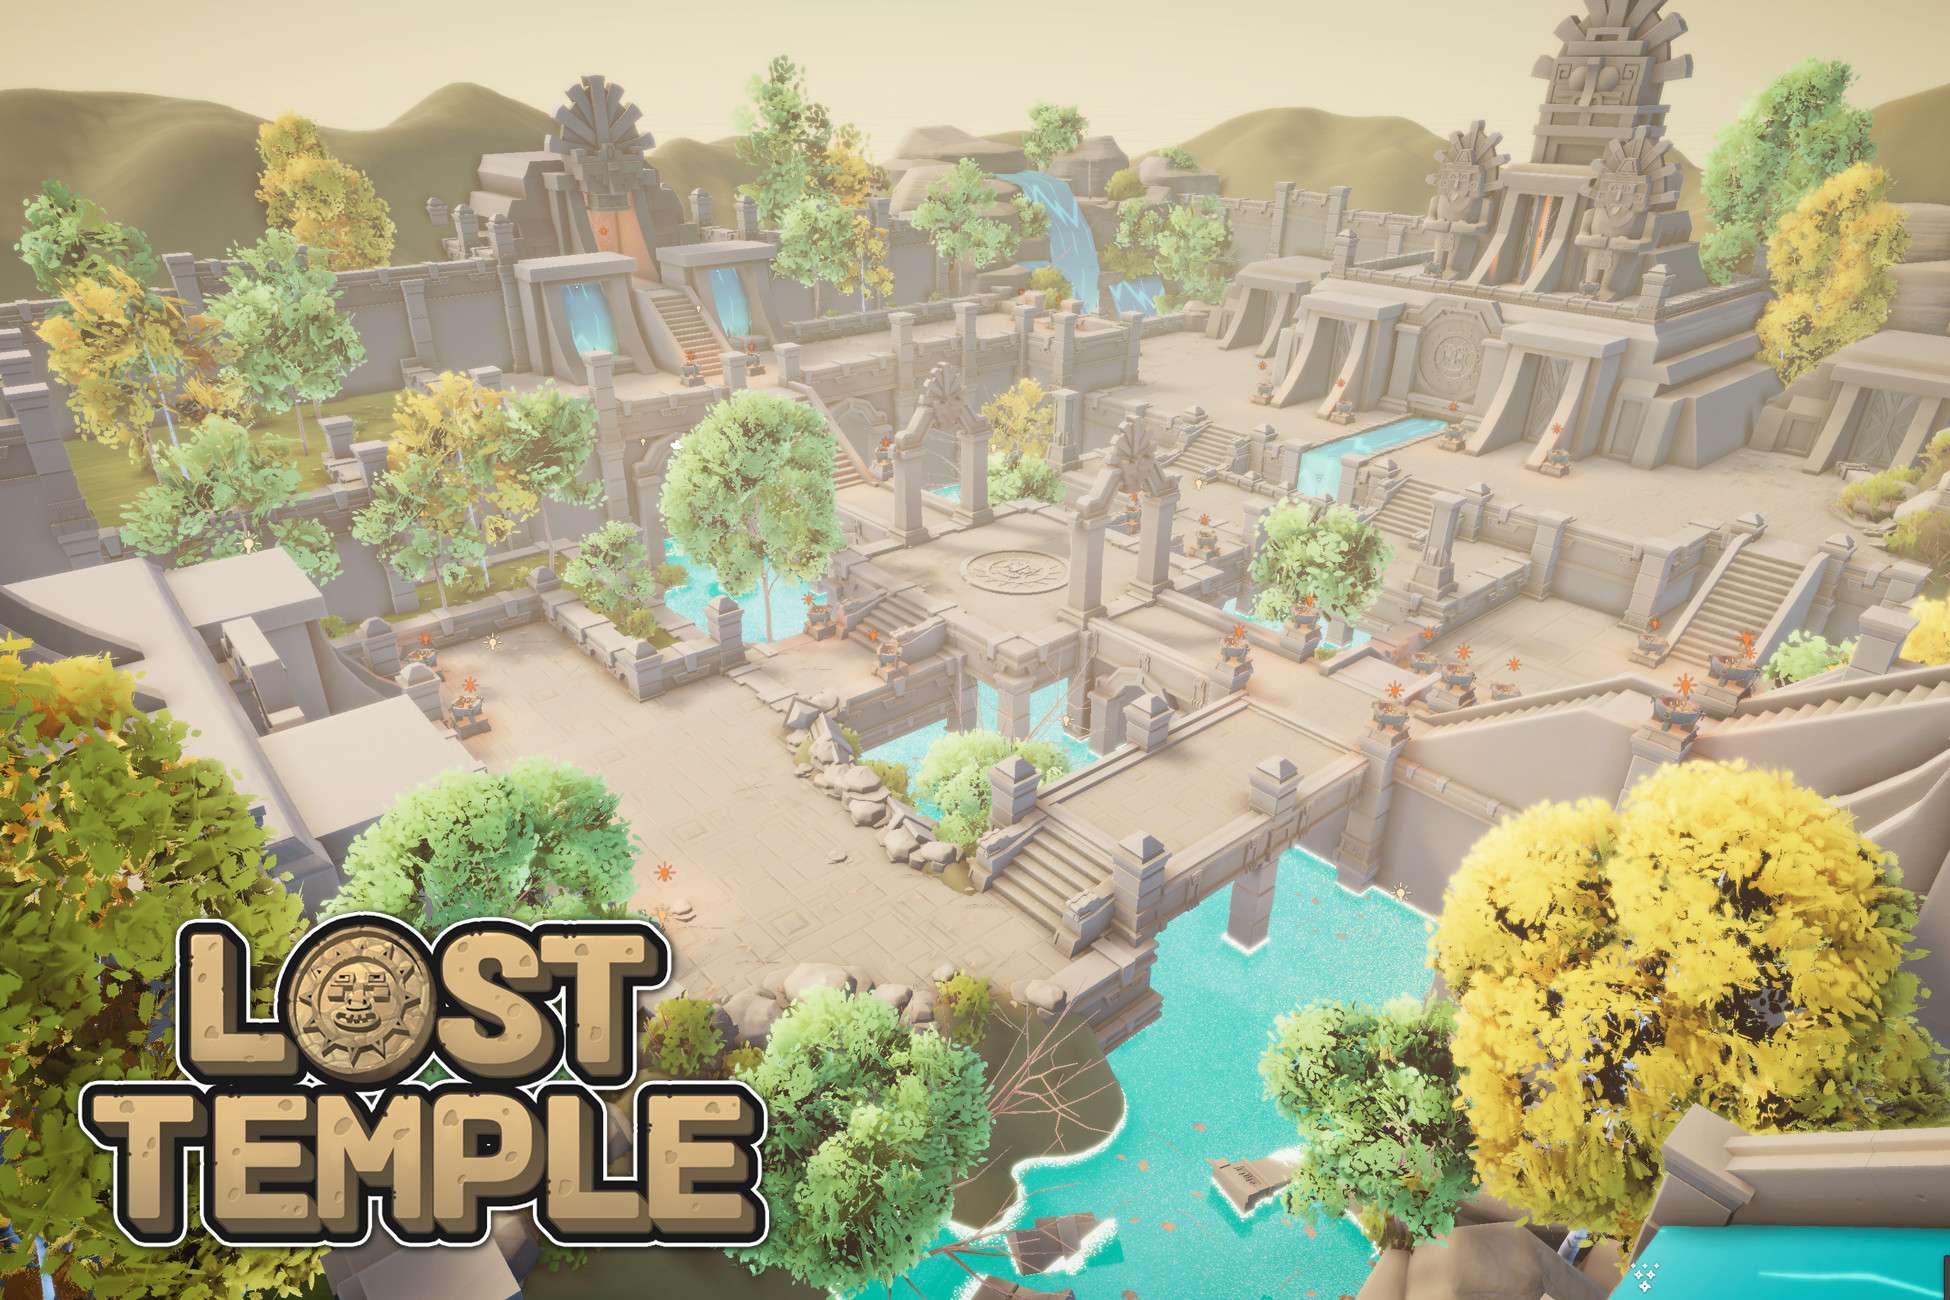 the-lost-temple-free-download-unity-asset-collection